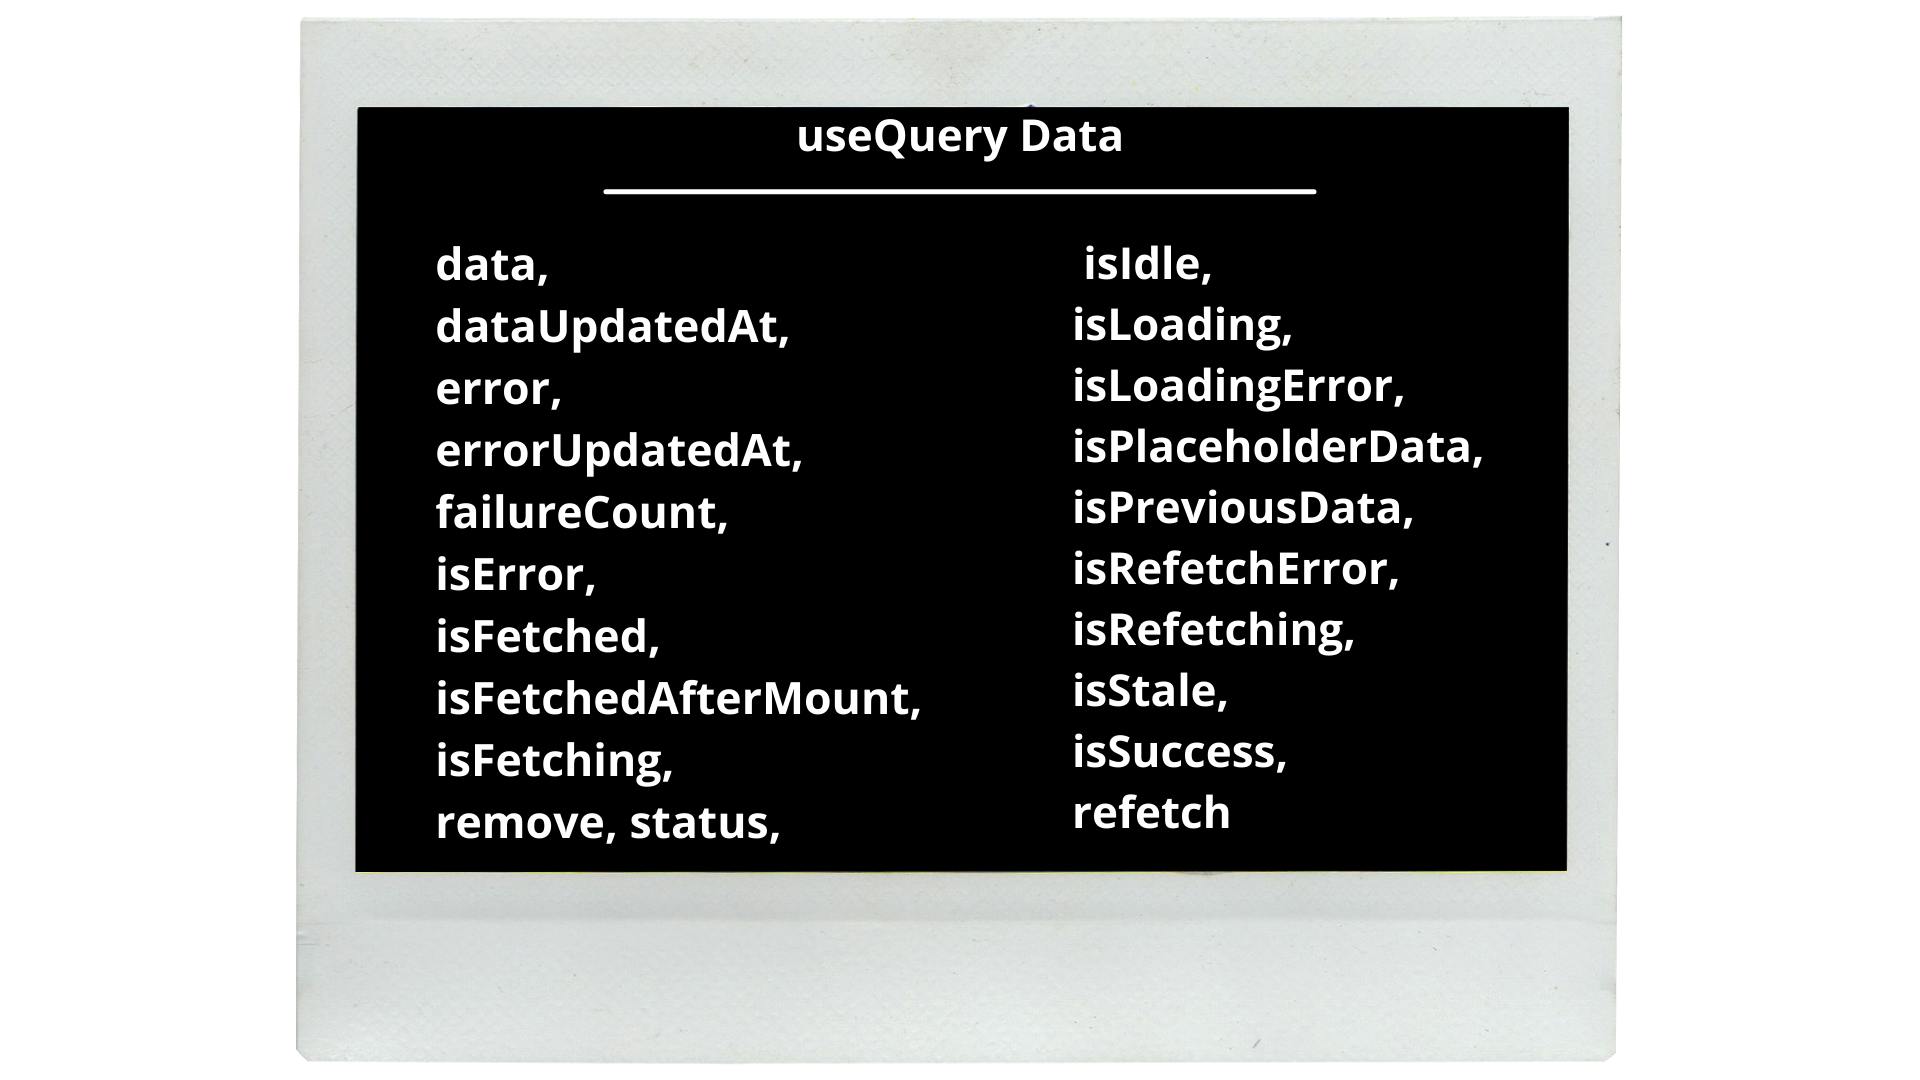 useQueryData.png